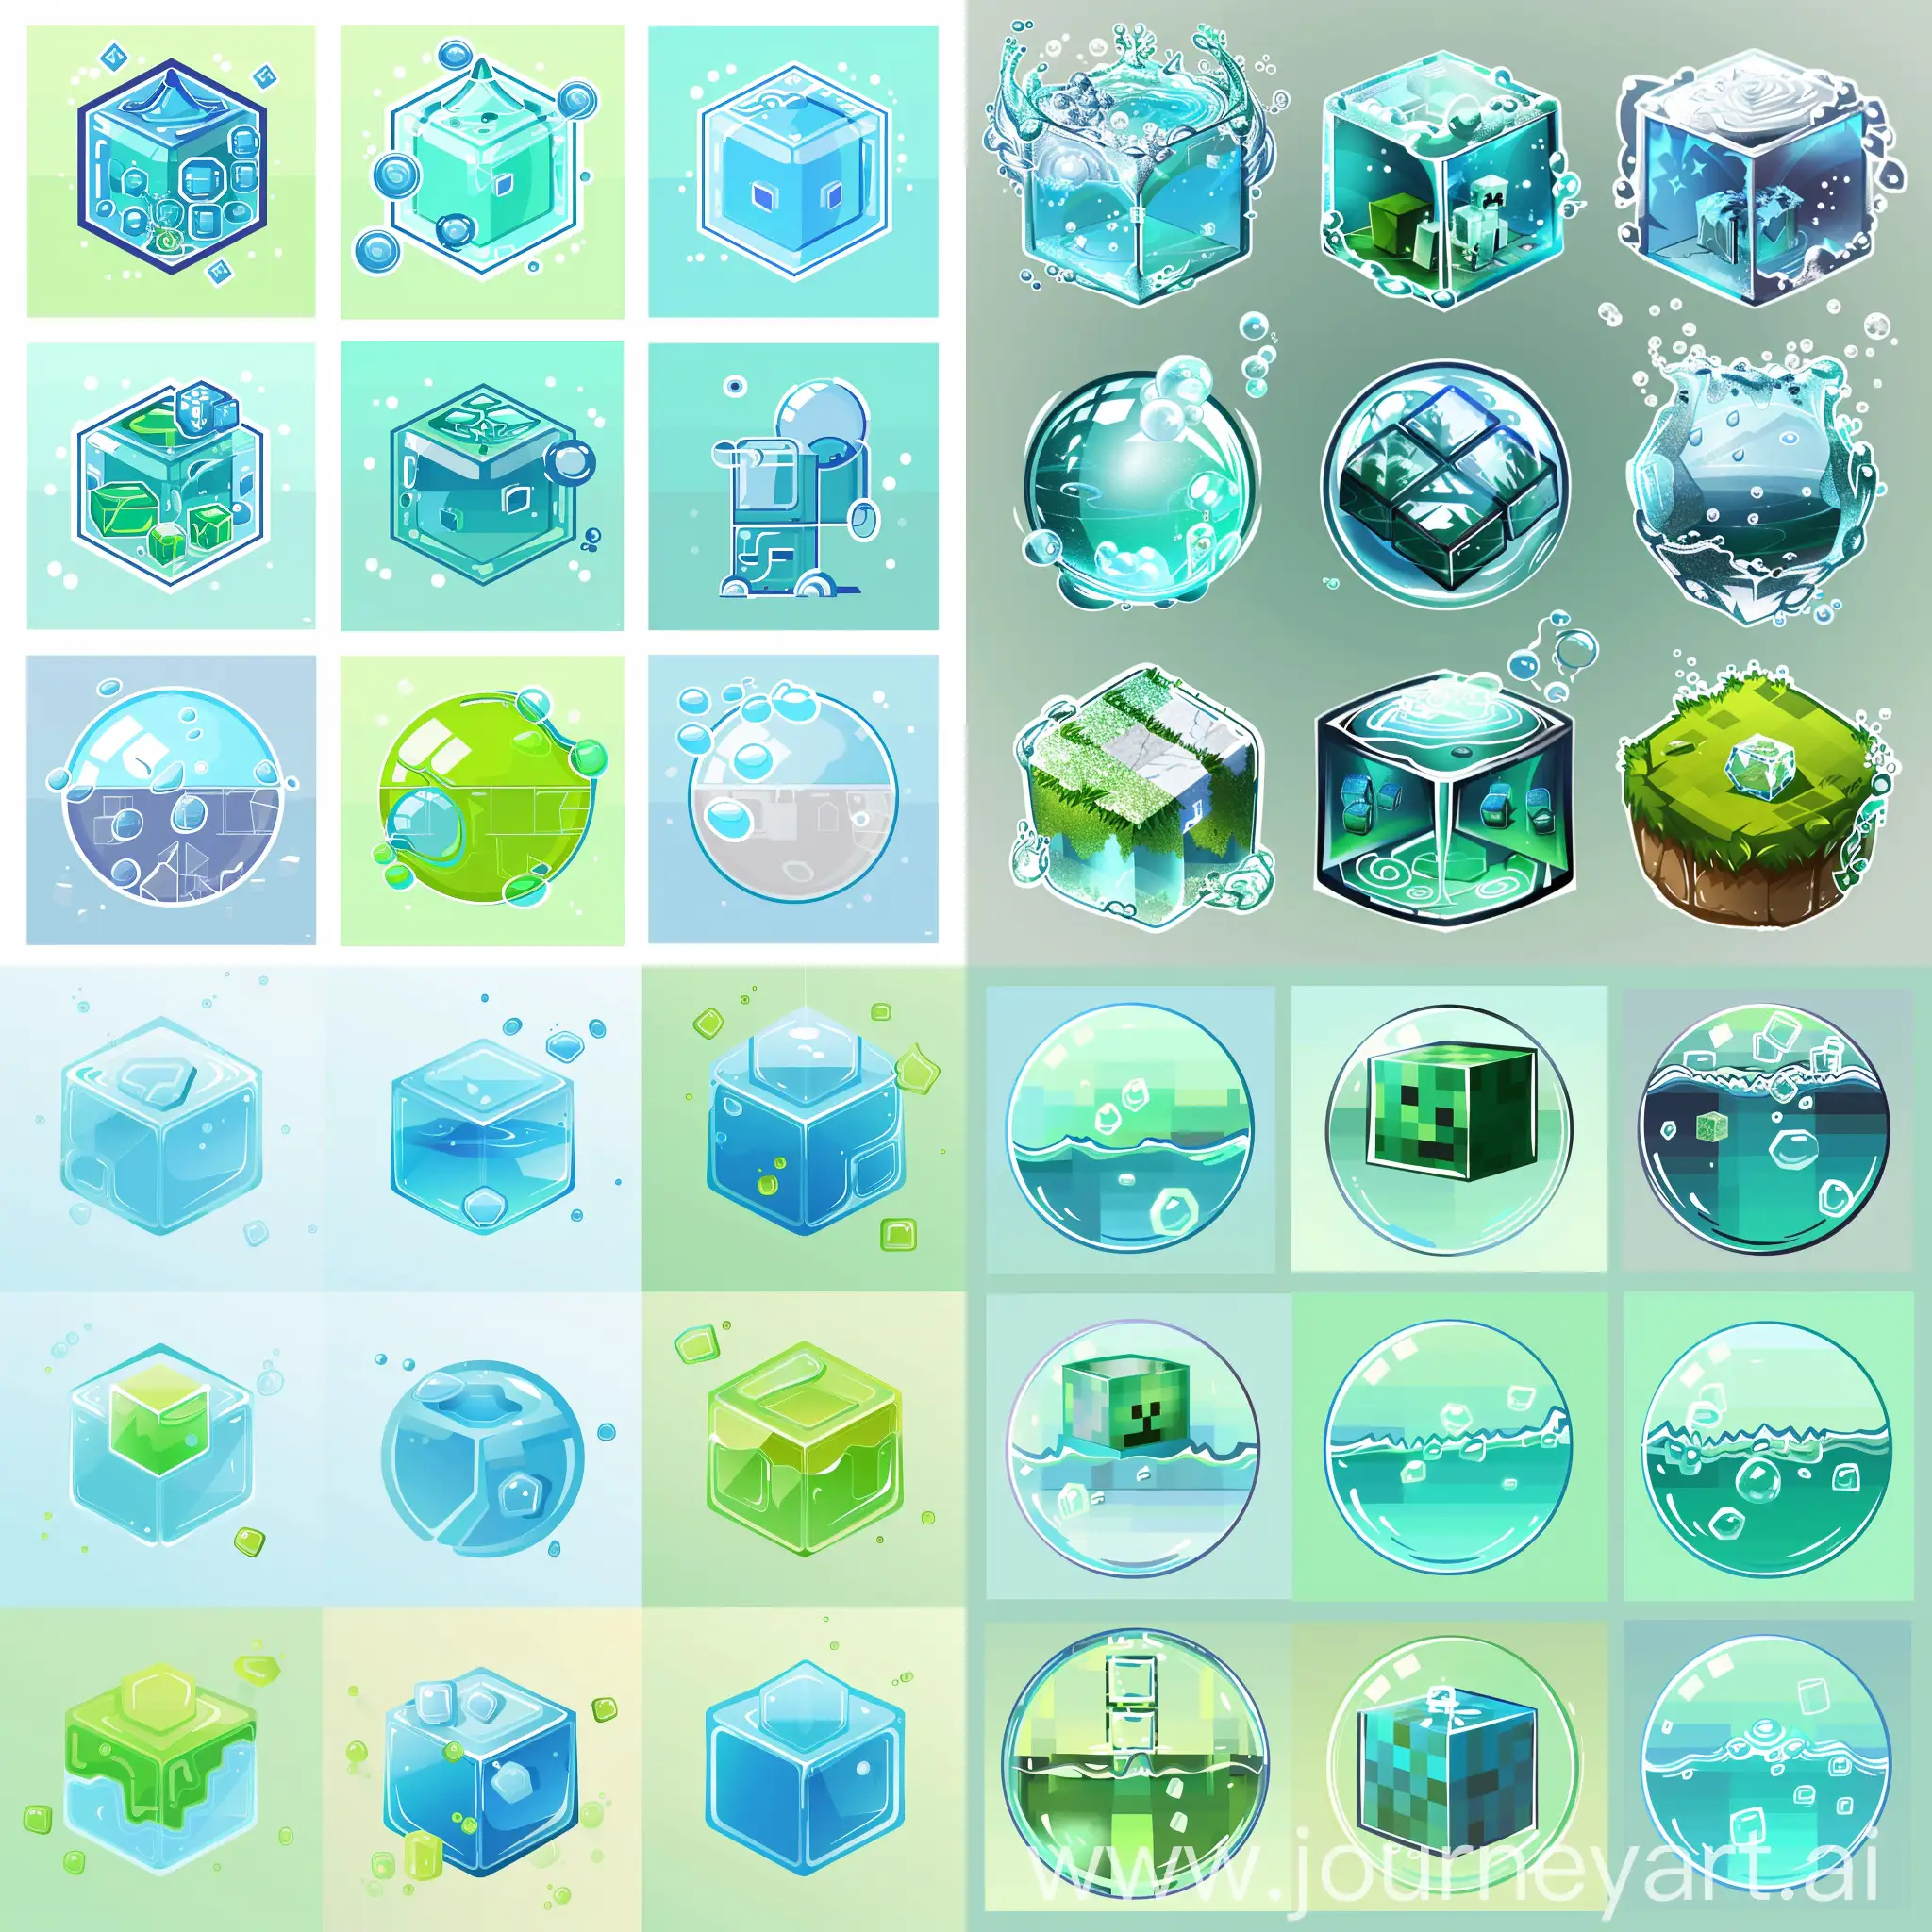 9 different logos featuring a cubic water bubble with a Minecraft theme, for a gaming context. The design should be very clean and slightly minimalistic, using a light blue and green color palette. The overall look should be vibrant, appealing to gamers and fans of Minecraft.